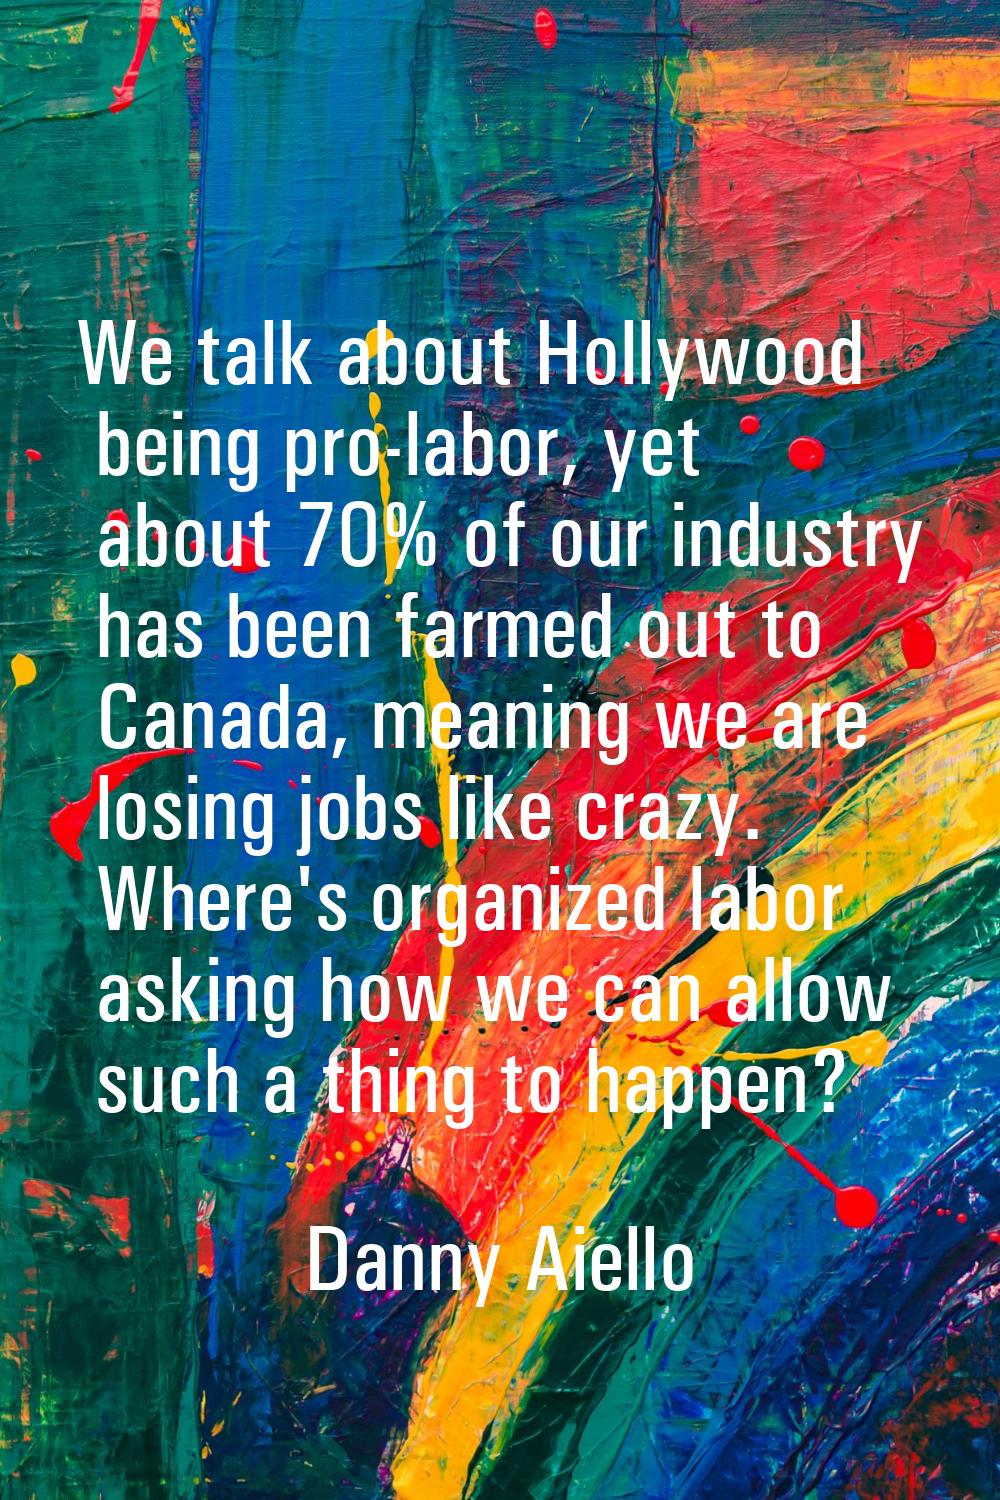 We talk about Hollywood being pro-labor, yet about 70% of our industry has been farmed out to Canad